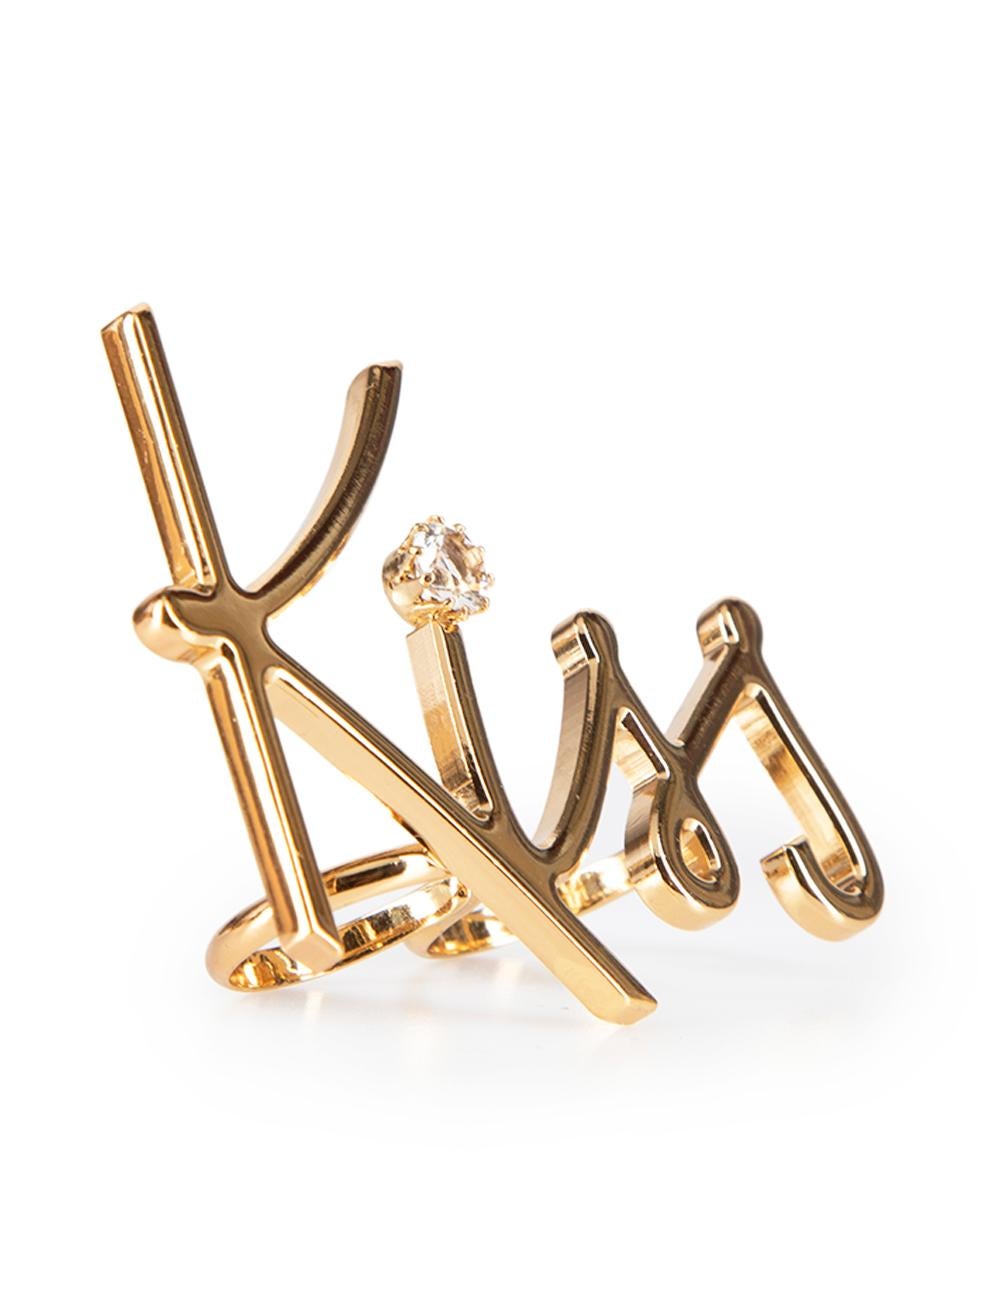 CONDITION is Very good. Minimal wear to ring is evident. Minimal wear to the rear with tiny scratches on this used Lanvin designer resale item.



Details


Gold

Metal

Double ring

'Kiss' Lettering design

Crystal embellishment



 

Made in